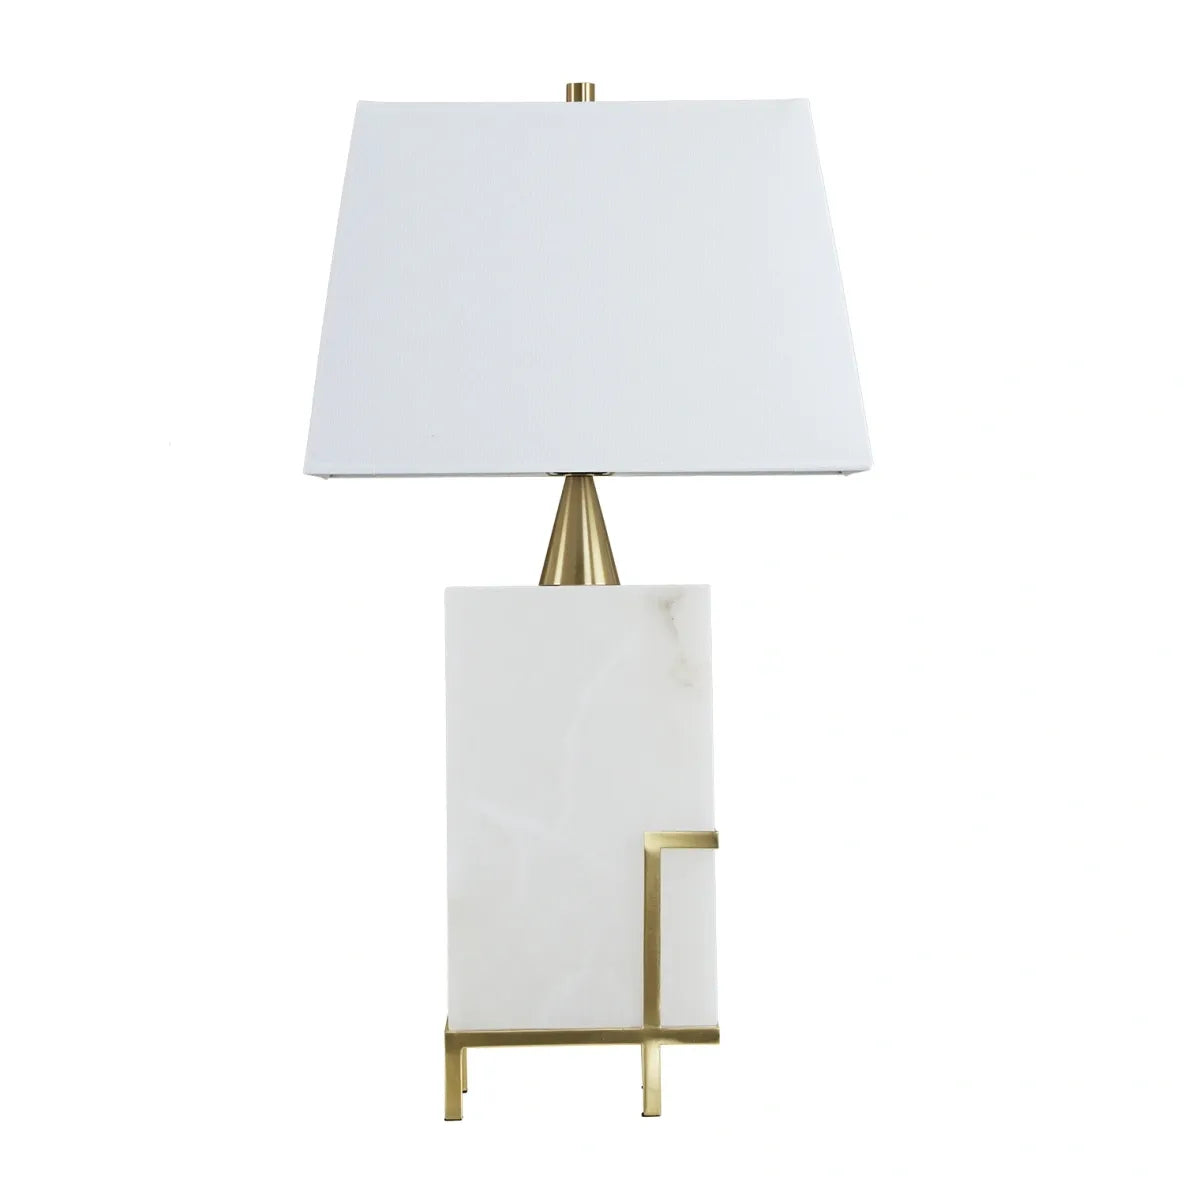 Large White Alabaster and Brass Table Lamp with Tapered Shade